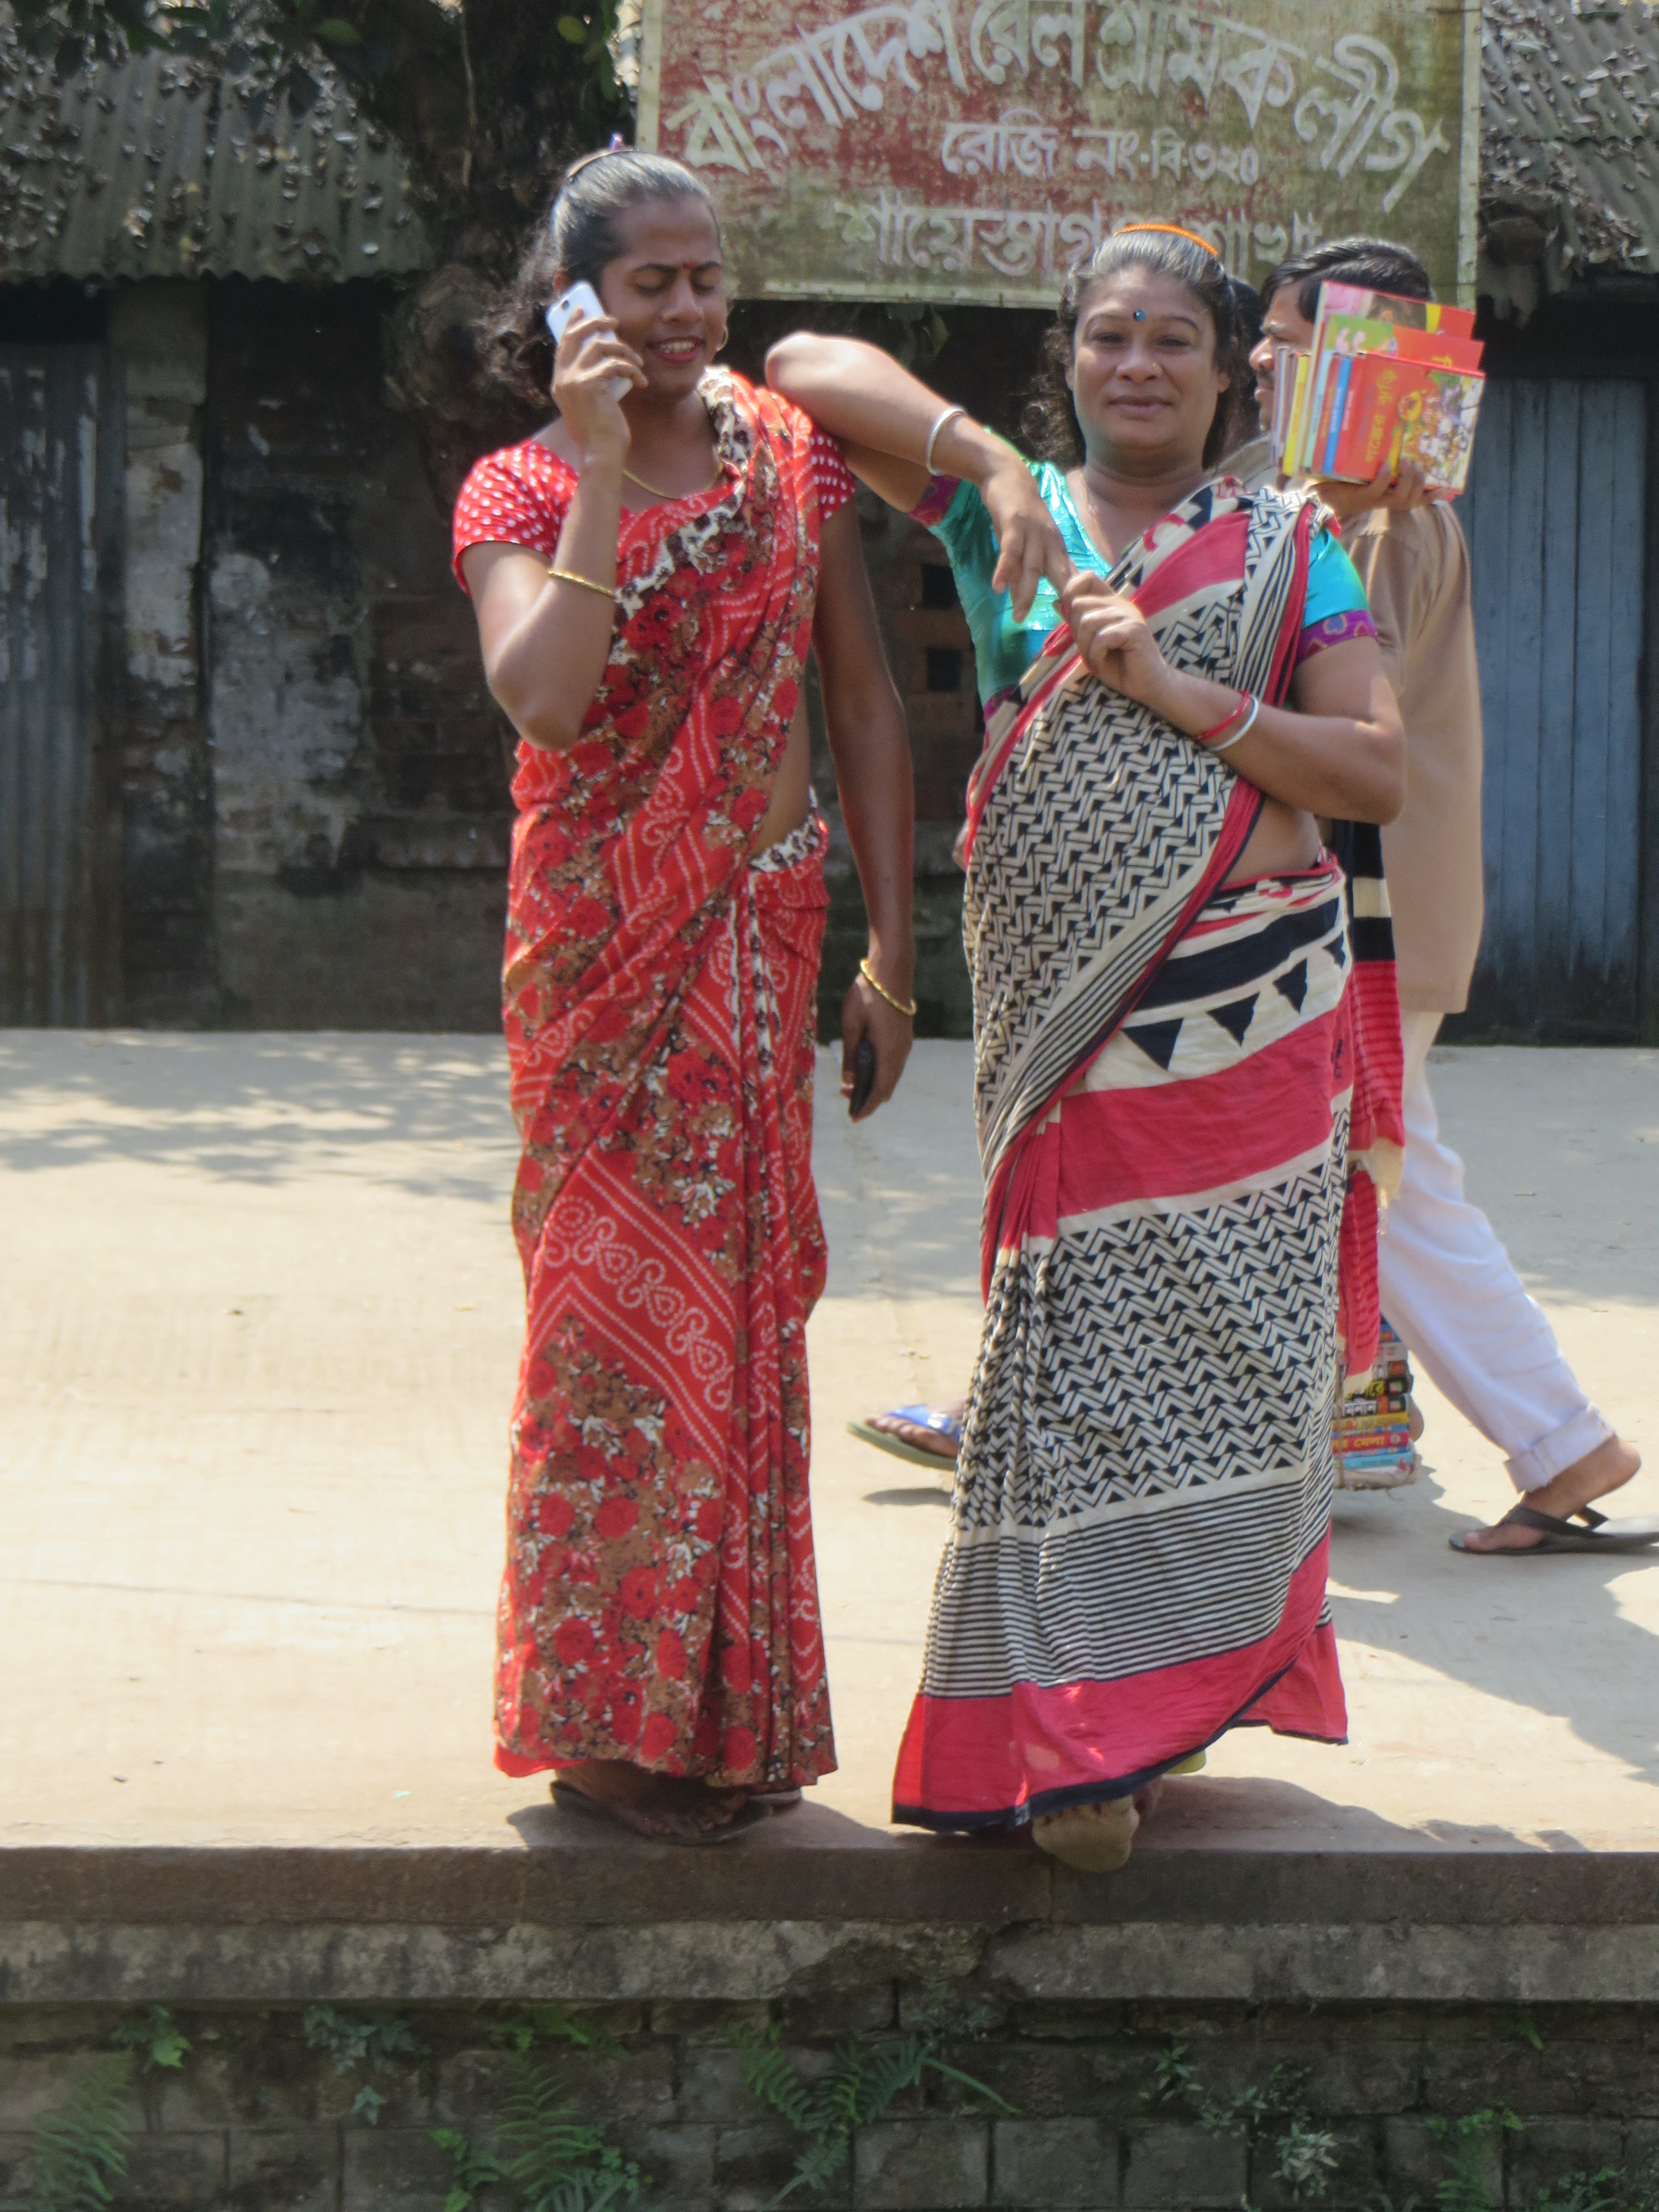 Although marginalised by their sexulaity Hijra have vital roles to play in some ceremonies